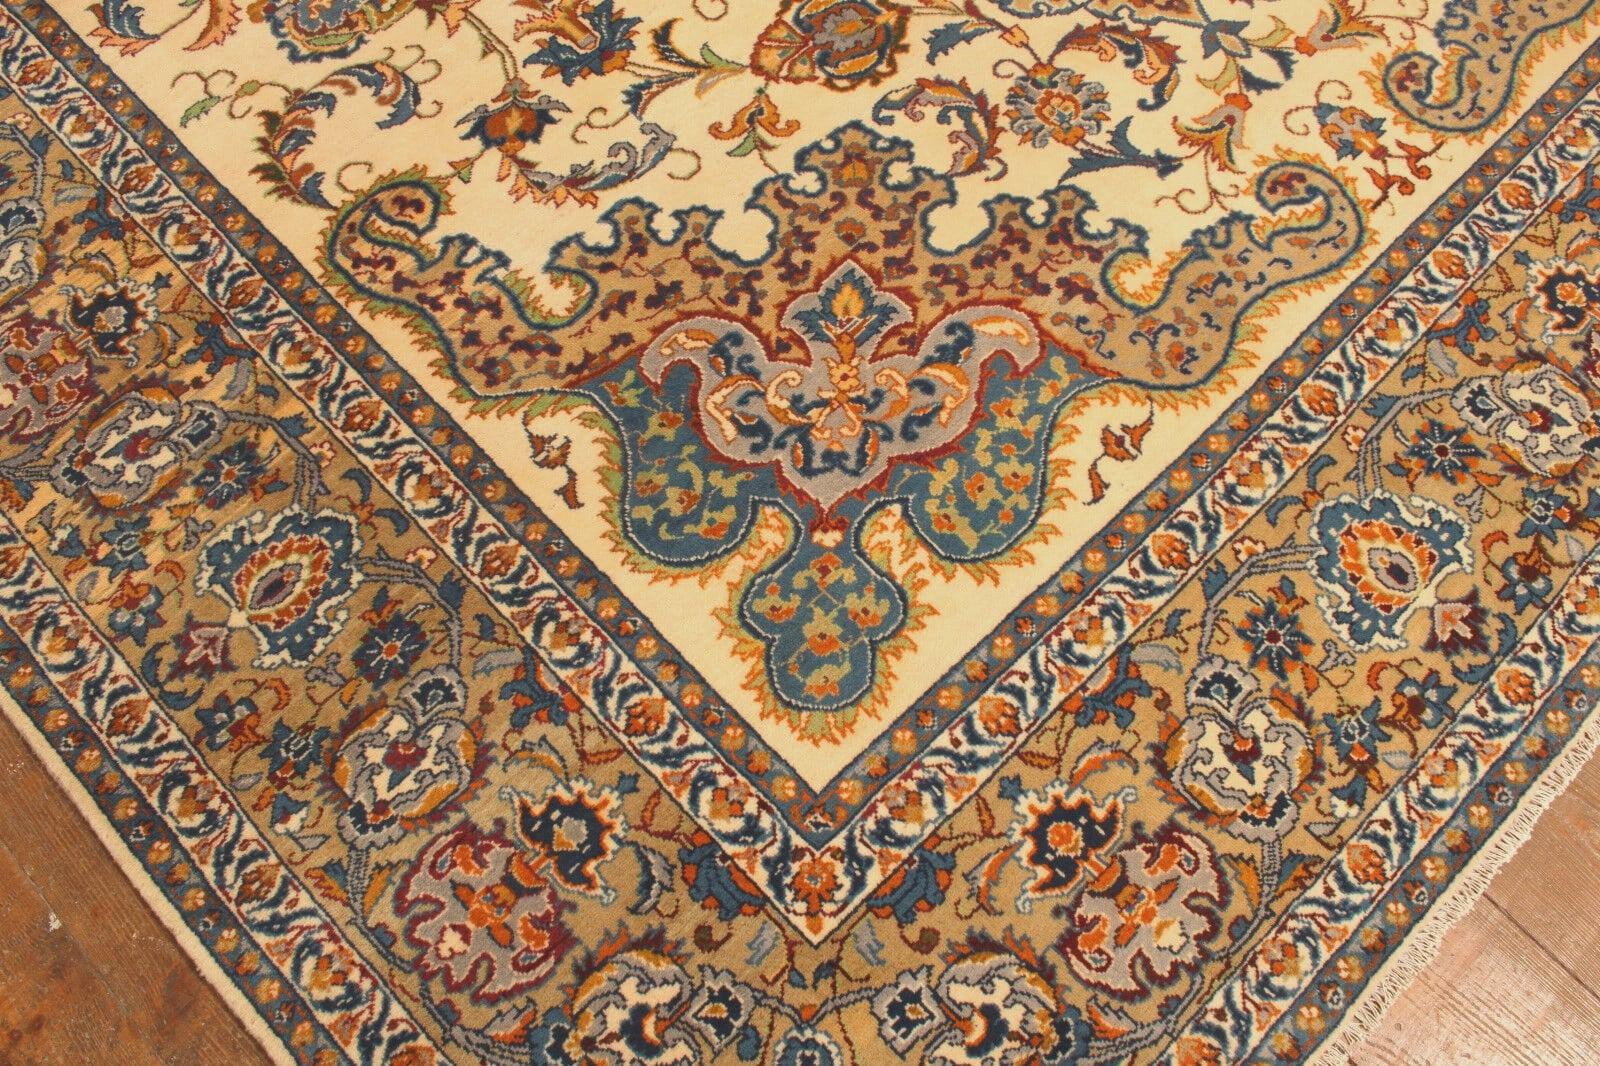 Handmade Vintage Persian Style Isfahan Rug 9.9' x 13.7', 1990s - 1T45 In Good Condition For Sale In Bordeaux, FR